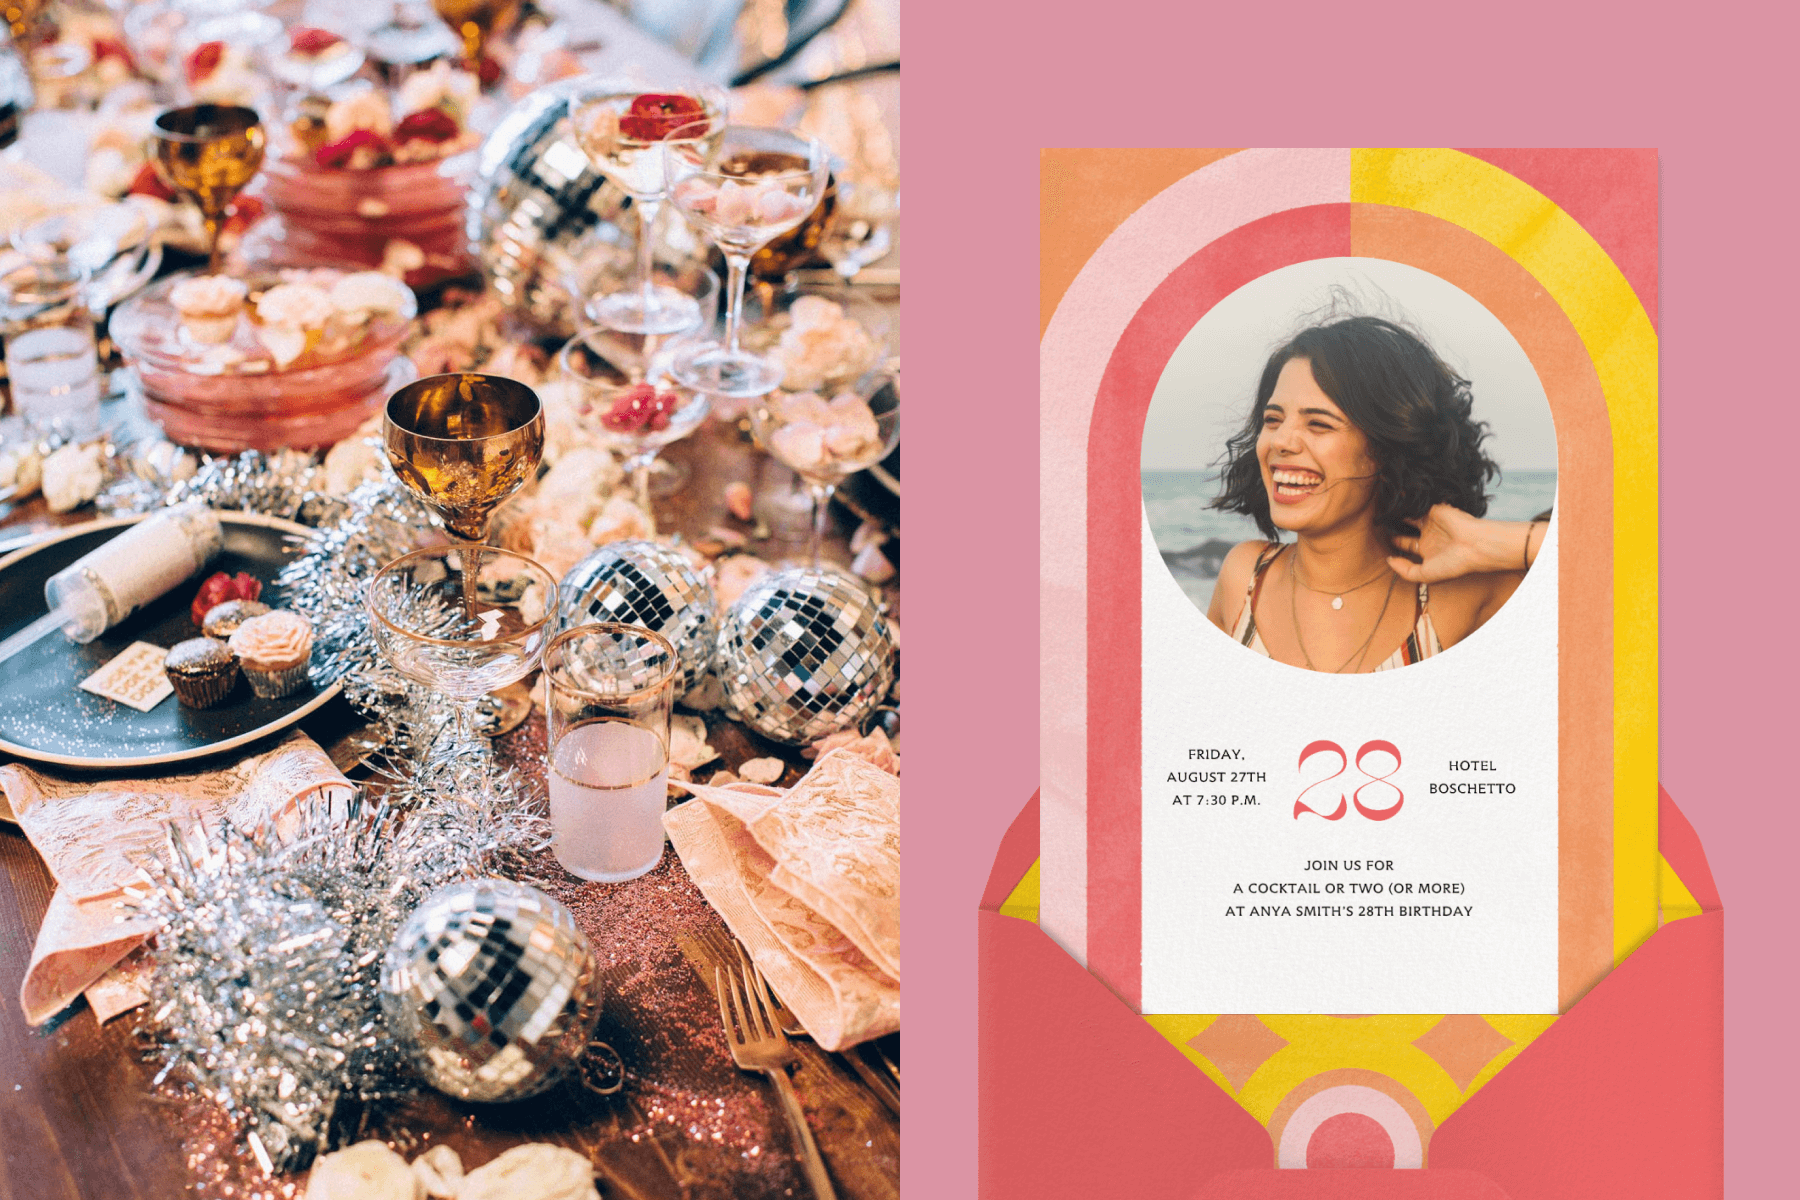 Left: A very full tabletop with silver tinsel, small disco balls, glitter, and gold and glass goblets. Right: A birthday invitation with a circular photo of a woman laughing and yellow, pink, and orange color block arch above it.